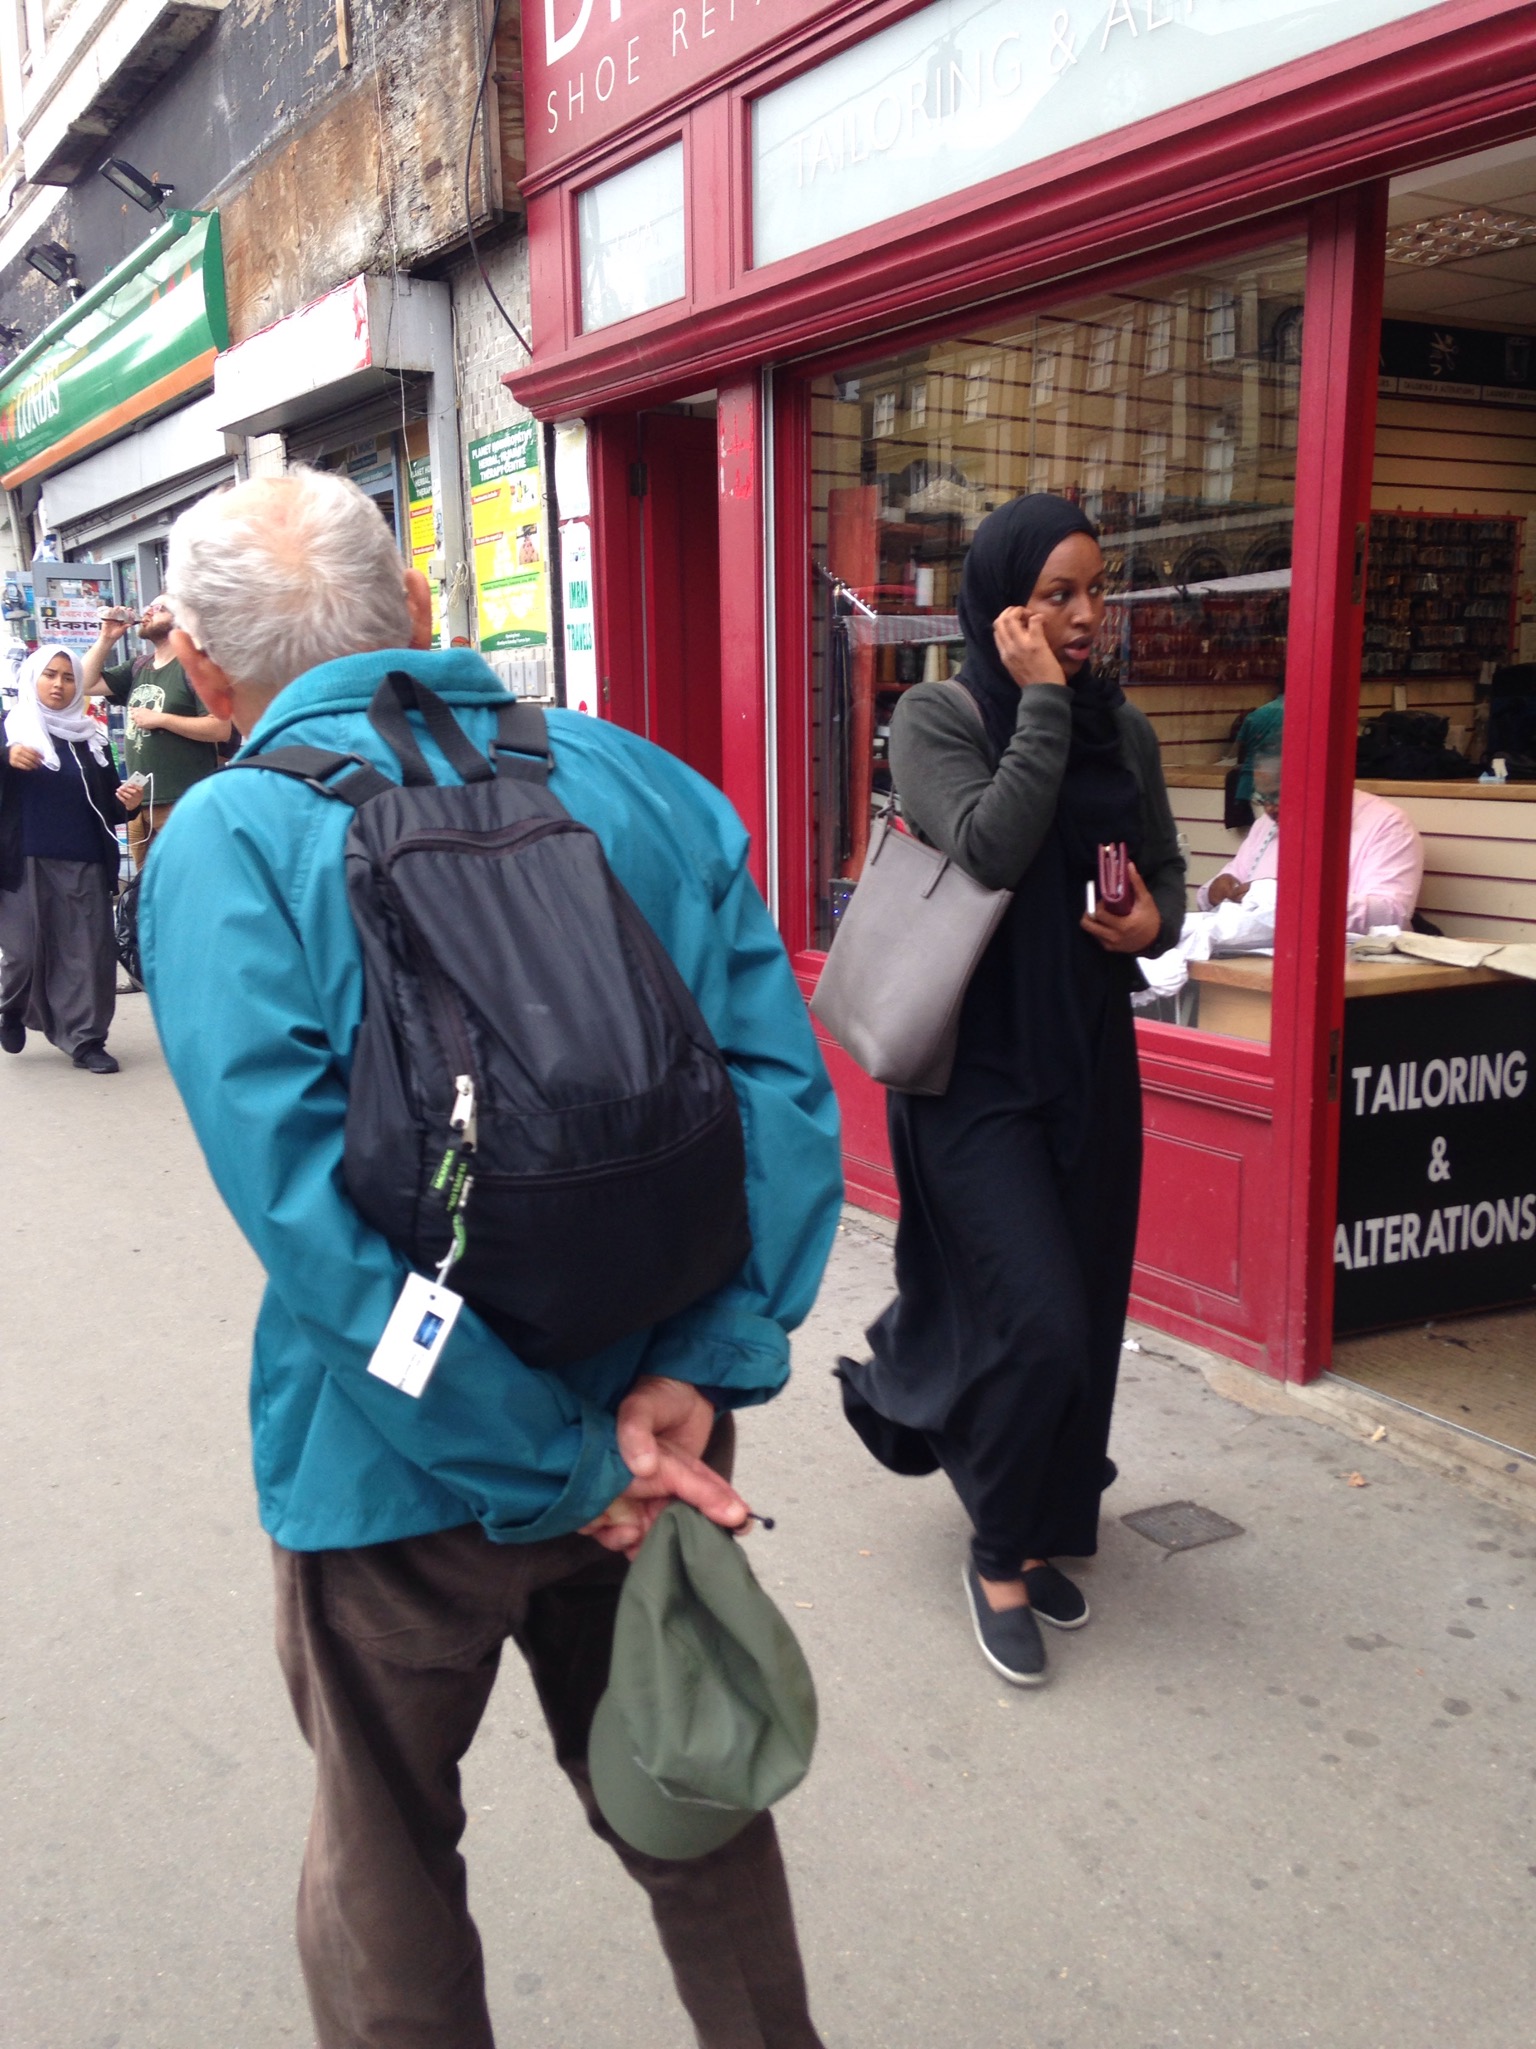  Fifteen minutes walk from our house is the Fox News "no-go-zone" of Whitechapel, a mostly Bengali neighborhood home to Britain's largest mosque. No go? Yes went! Is Pops more mystified by the woman's garb, or by the strange device she's holding to h